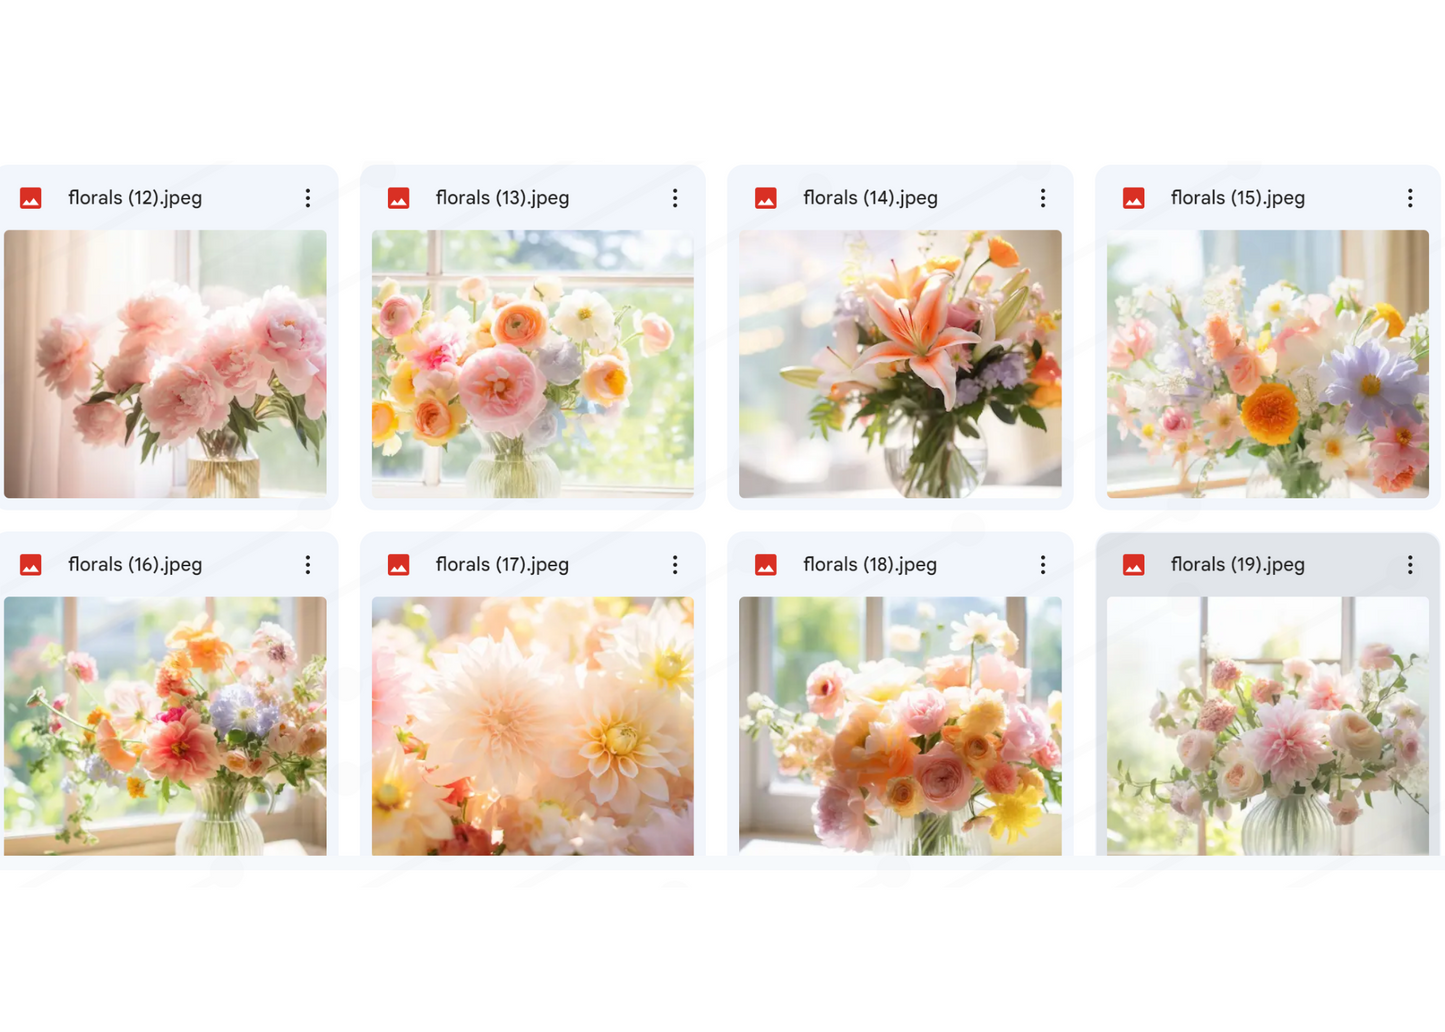 Floral Stock Photo Bundle - 22 Pastel Florals Photos- Specialty Stock Photos PLR (For Your Use Only )